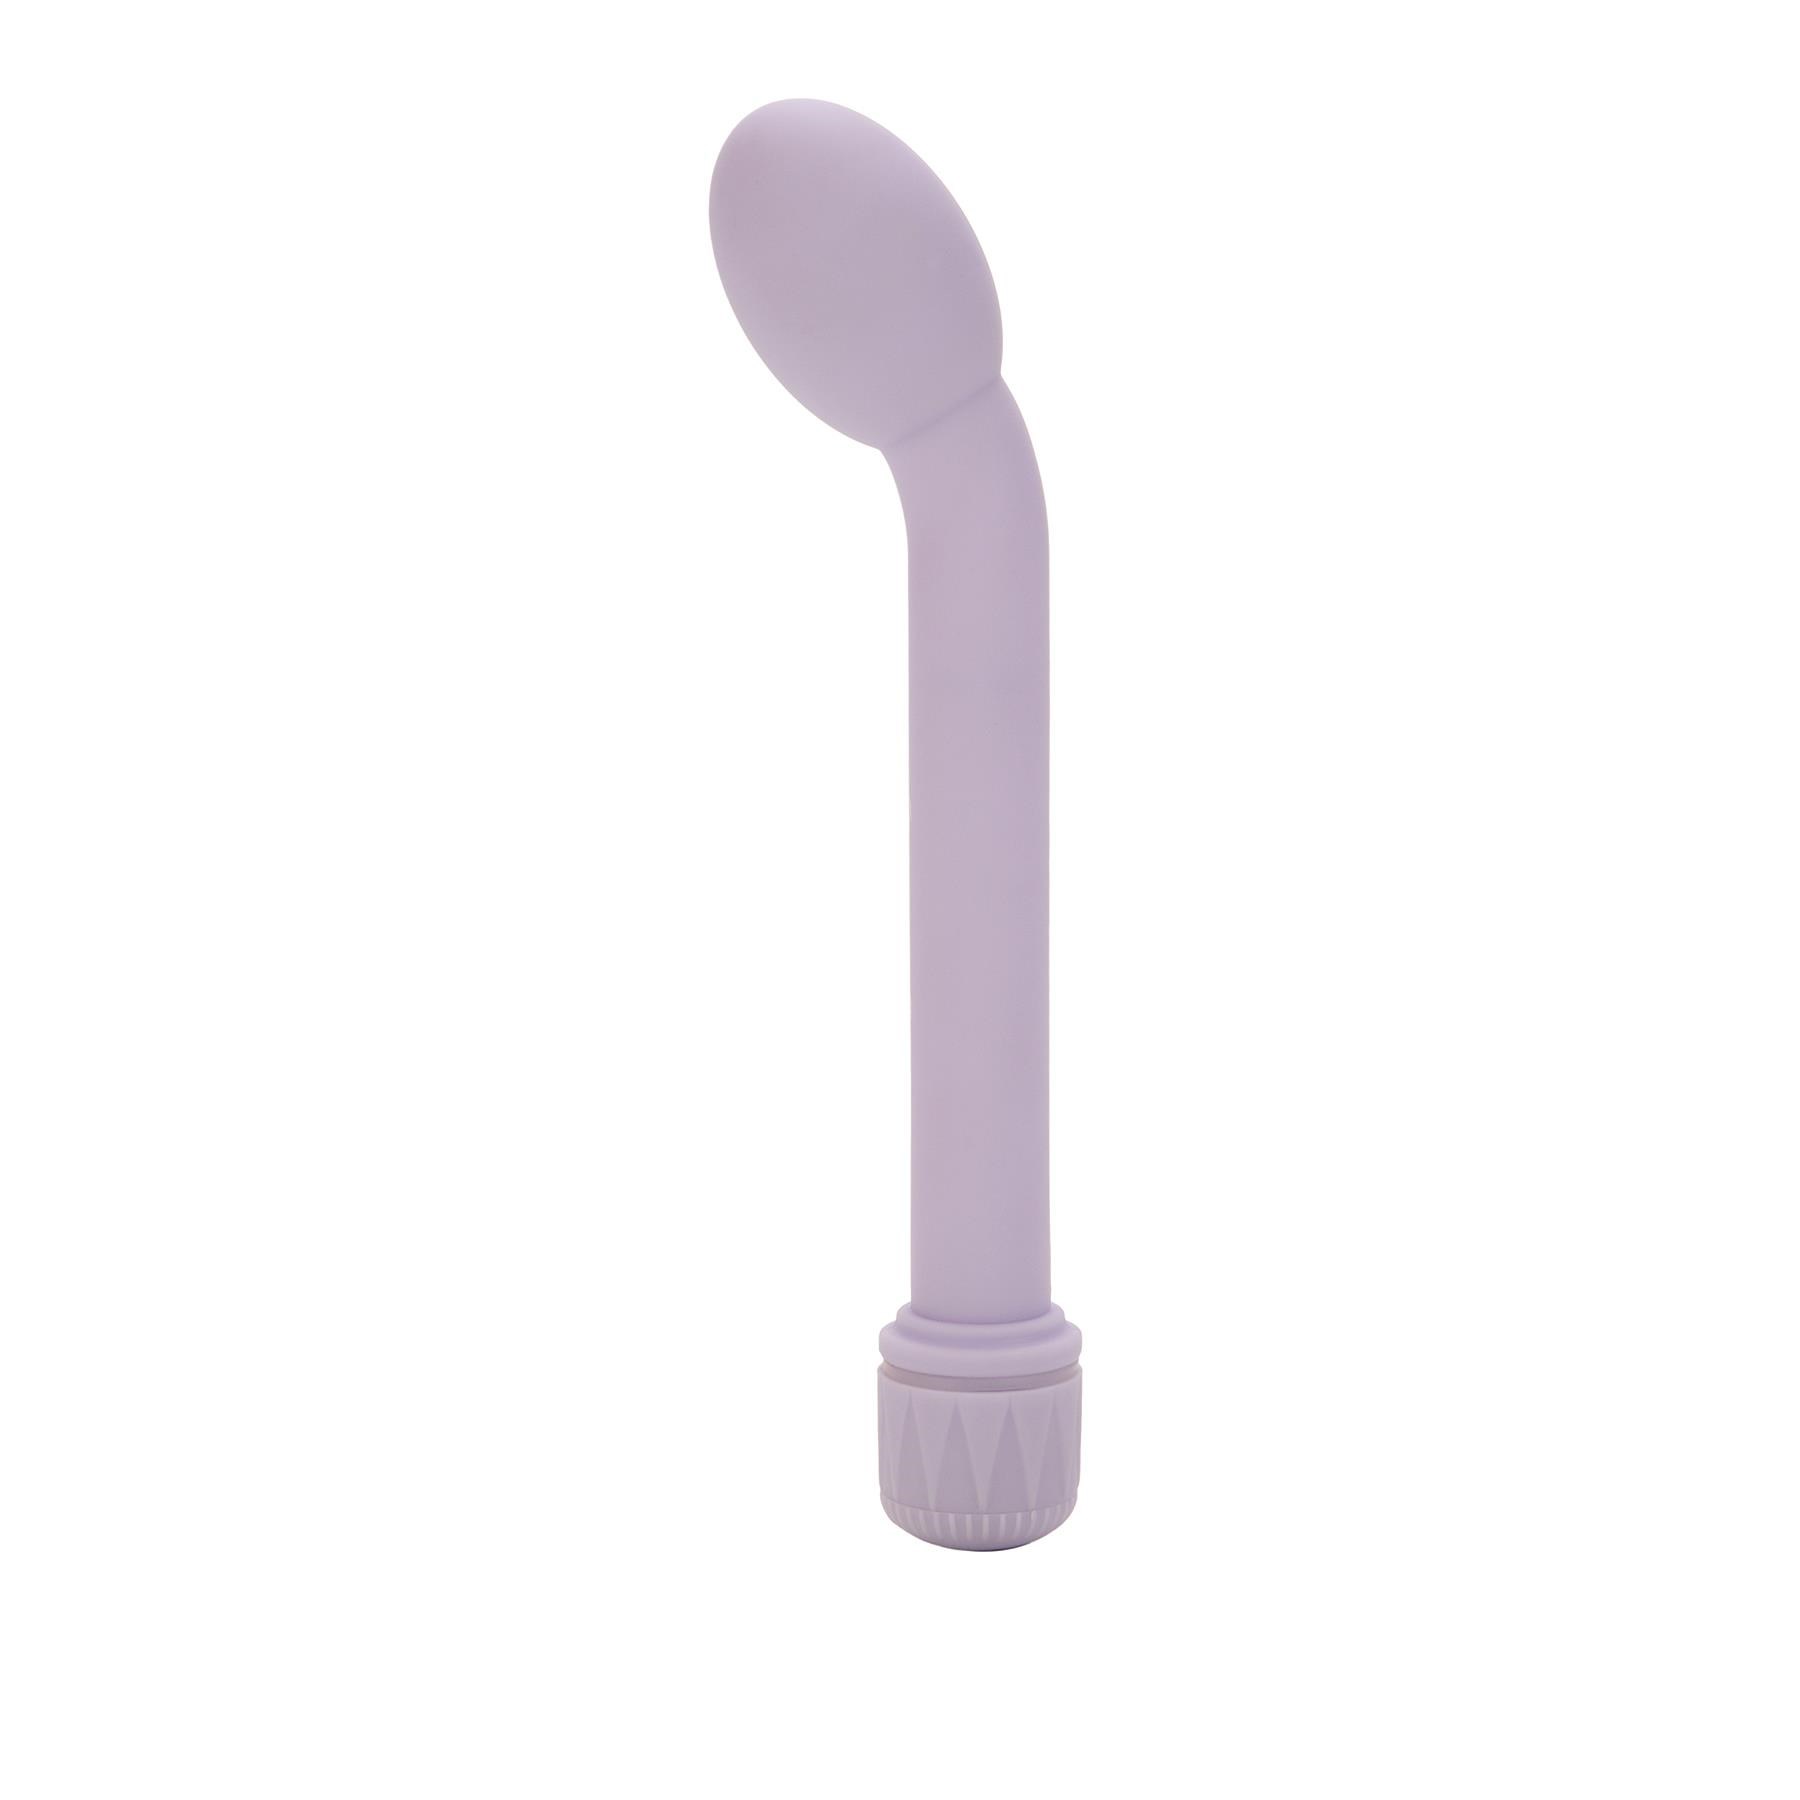 First Time G-Spot Tulip Upright Product Shot With G-Spot Tip to the Left